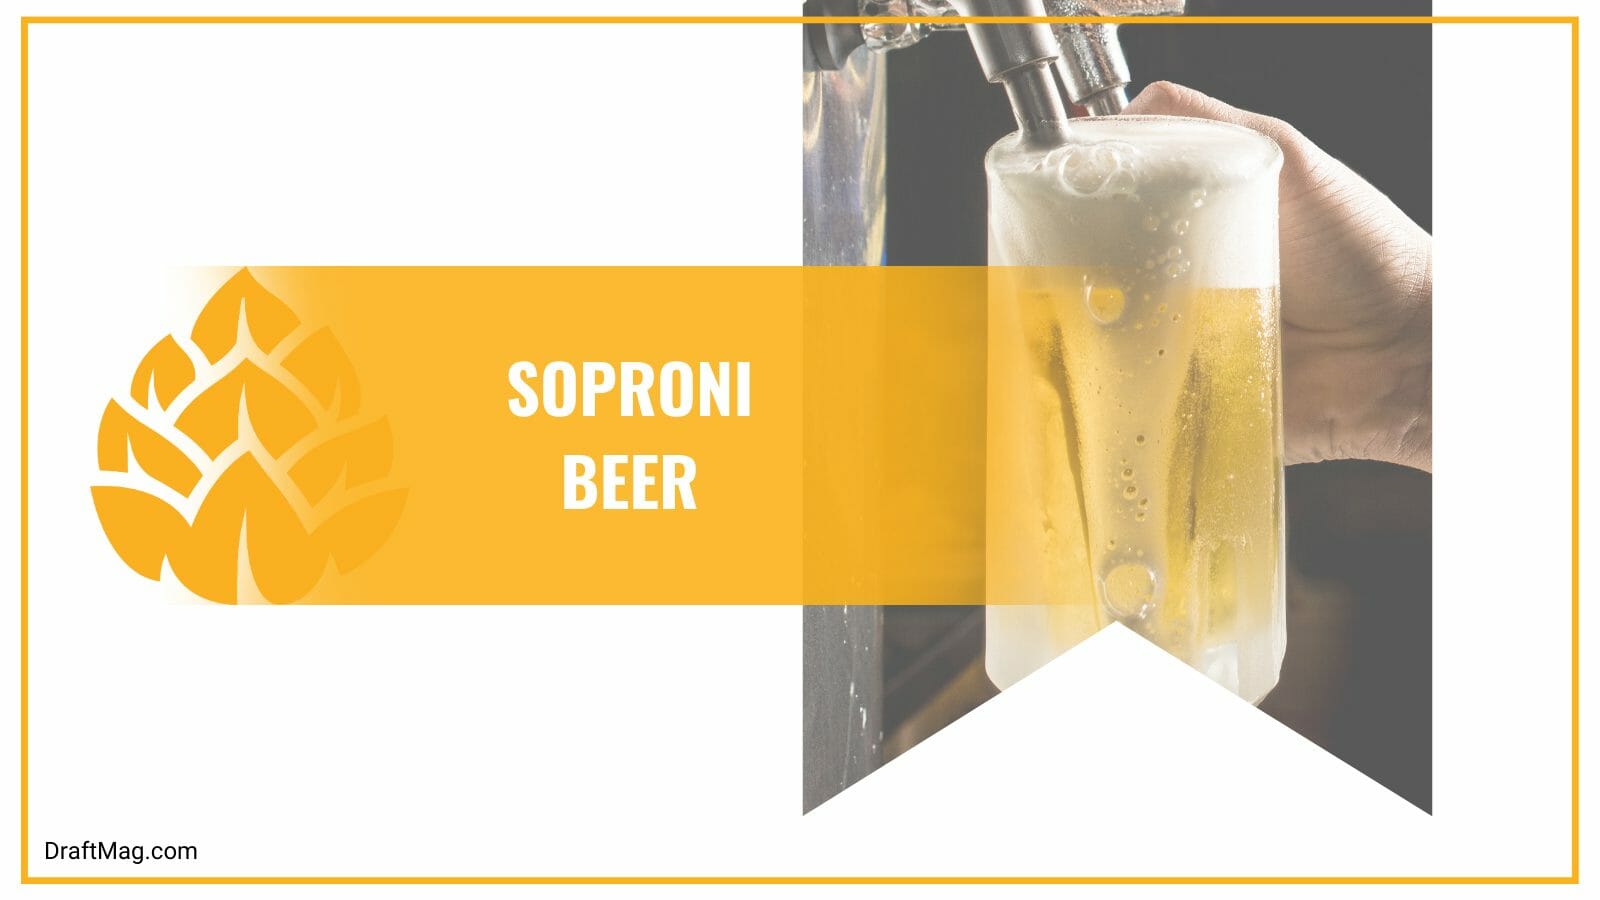 Soproni beer different levels of rings